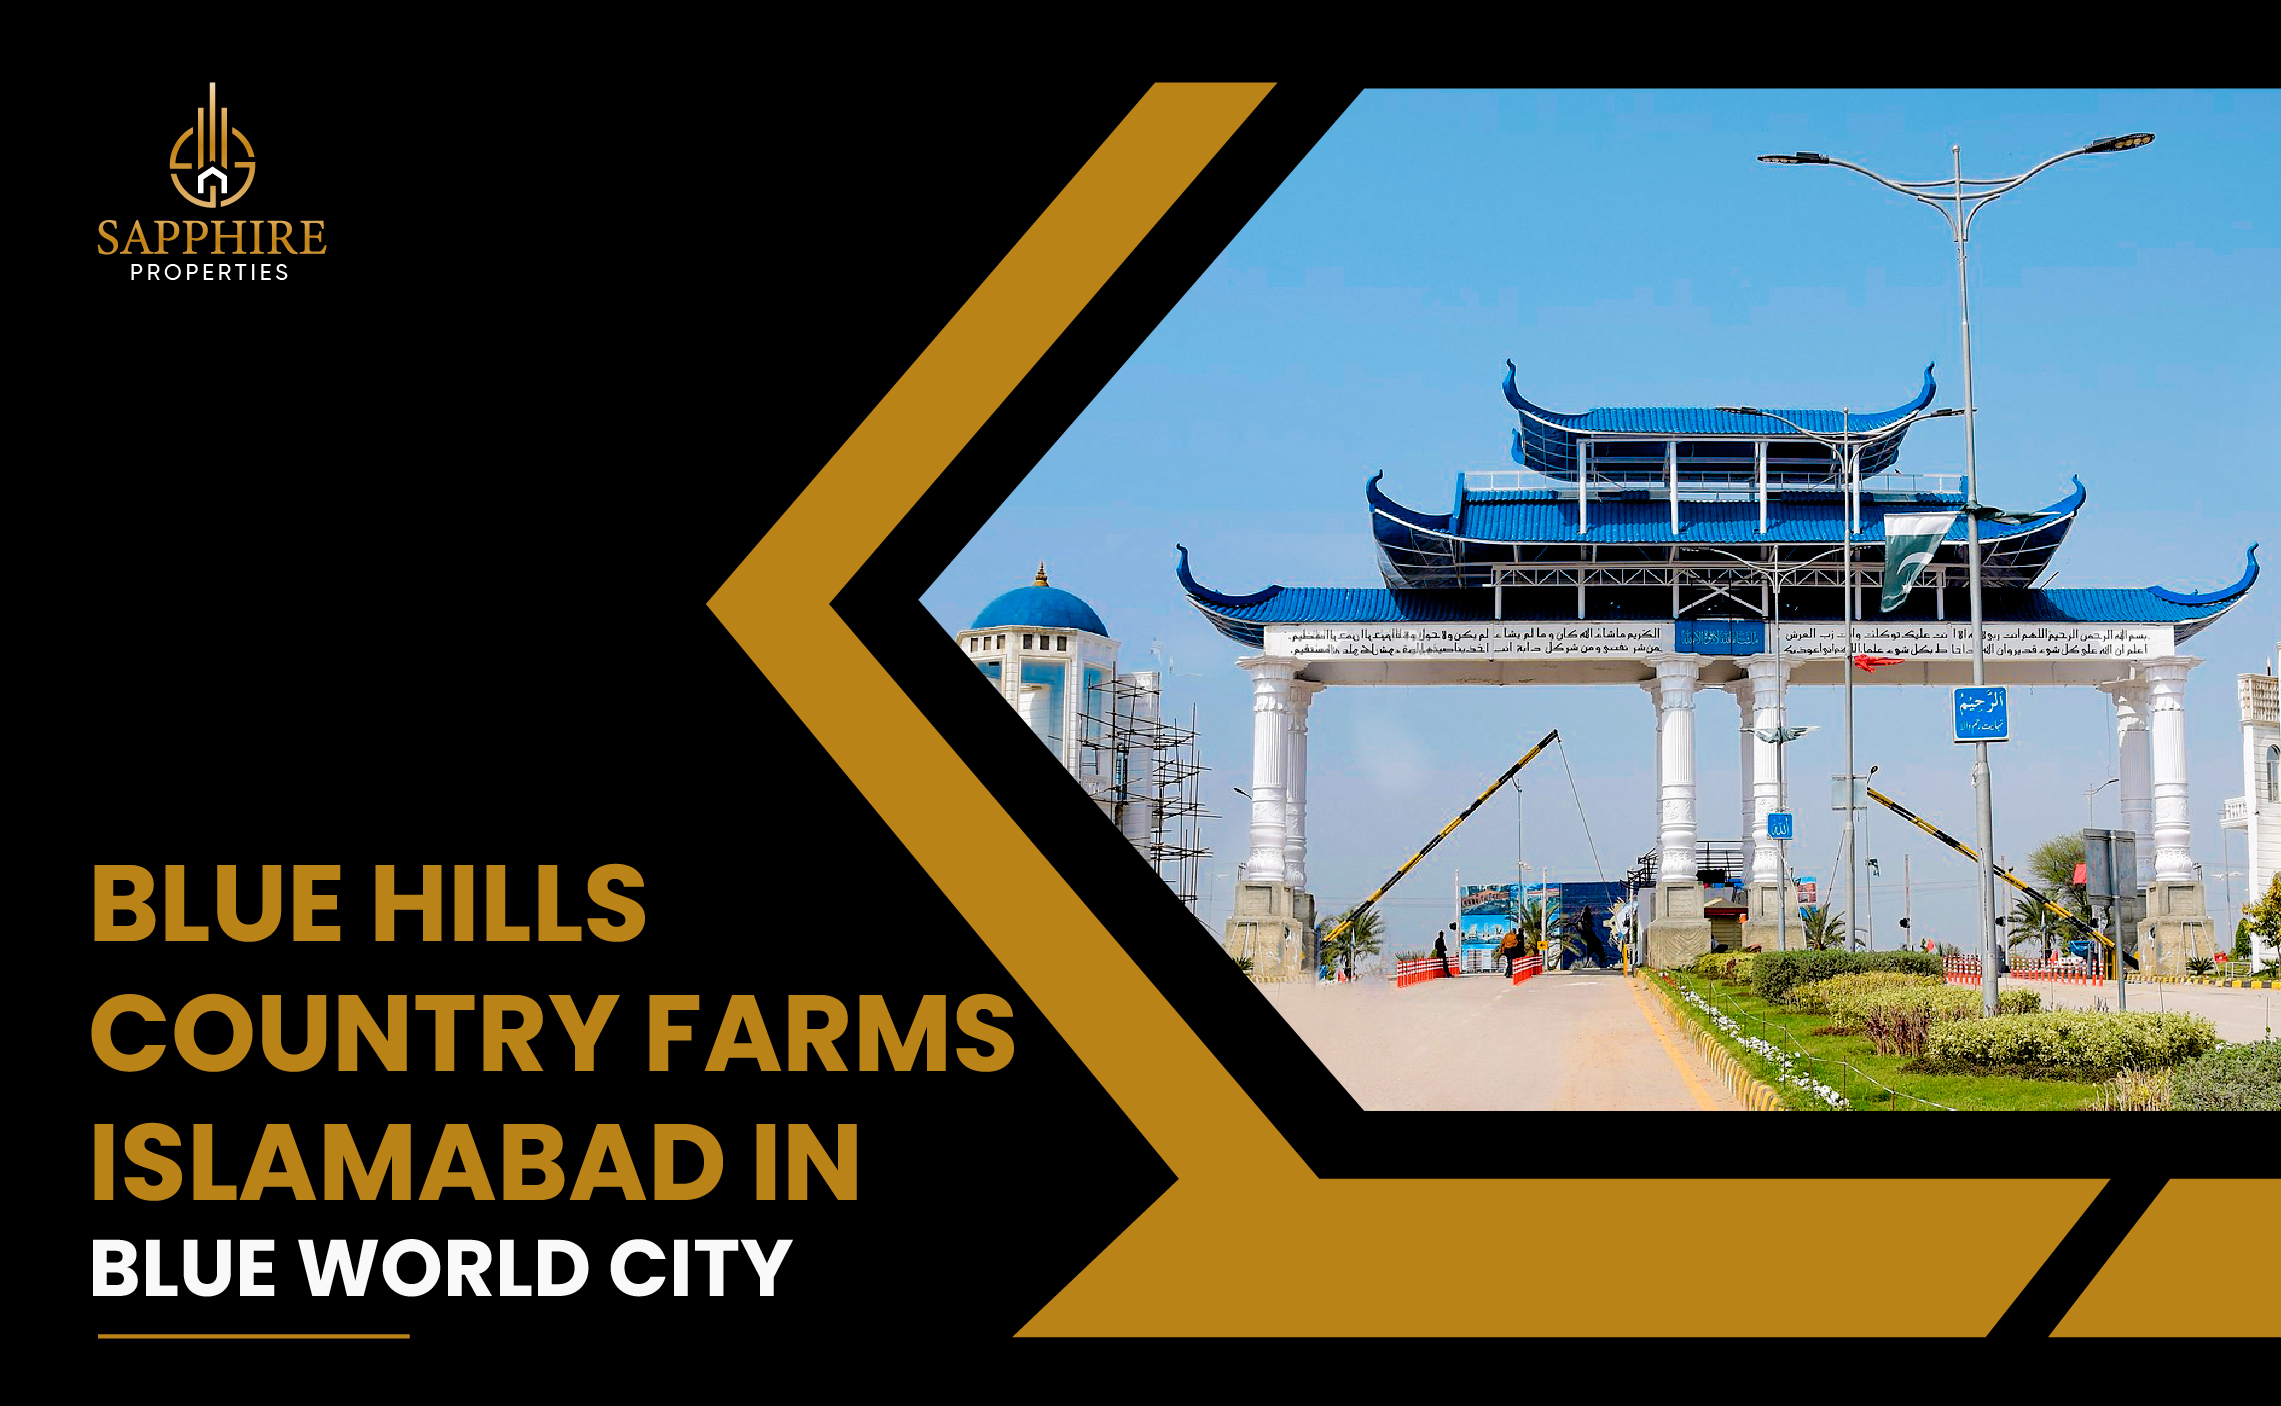 Blue Hills Country Farms Islamabad in Blue World City